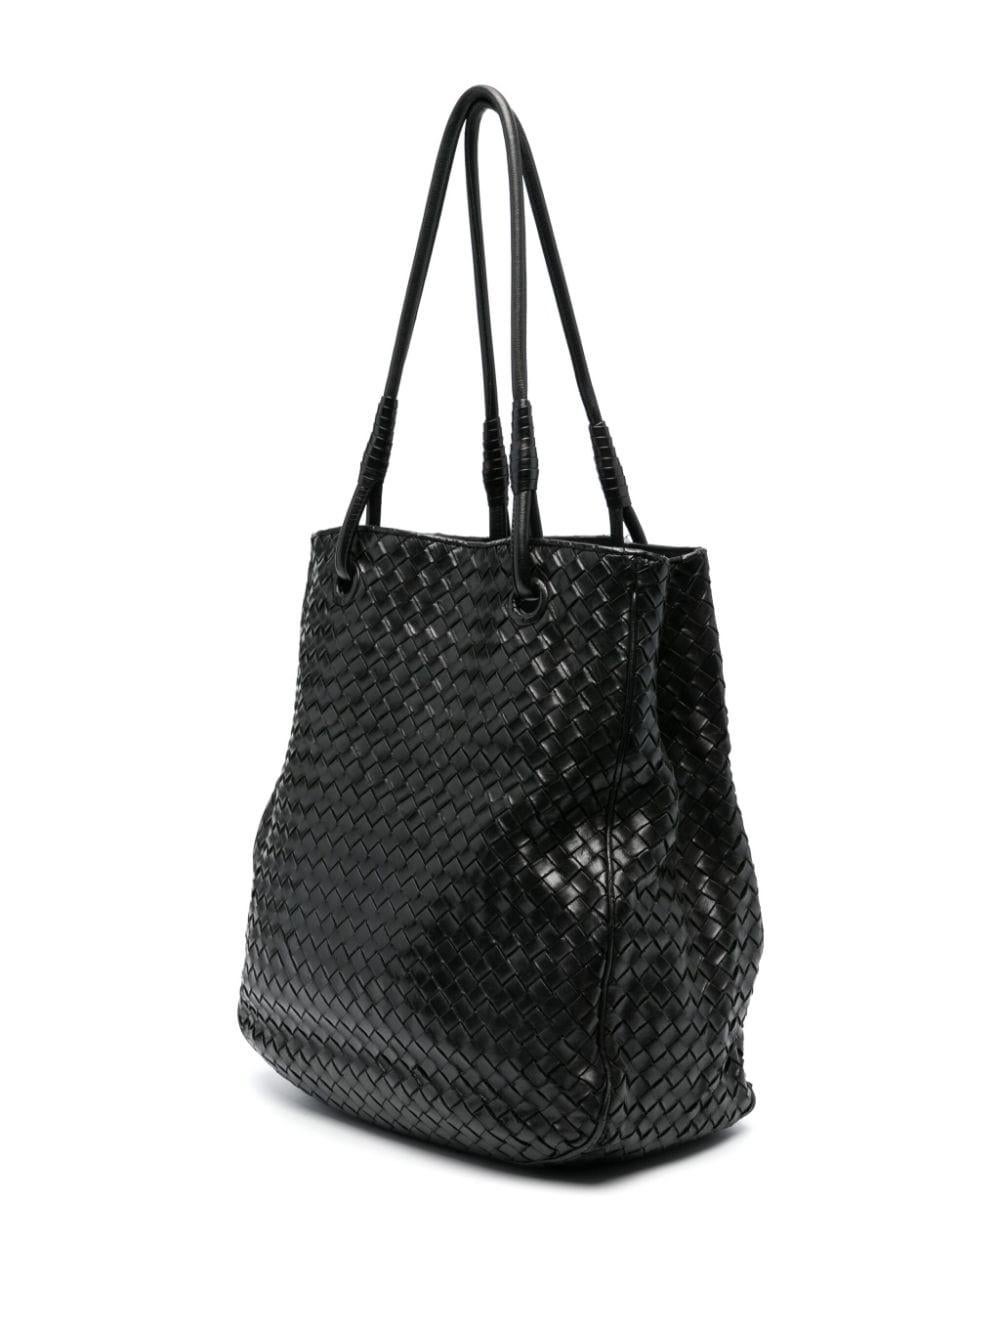 Bottega Veneta black leather Intrecciato open-top tote bag featuring iconic Intrecciato design, two rolled top handles, internal zip-fastening pockets, leather lining, internal logo plaque. 
Circa: 2000s
Length: 12.6in. (32cm) 
Height: 12.2in.